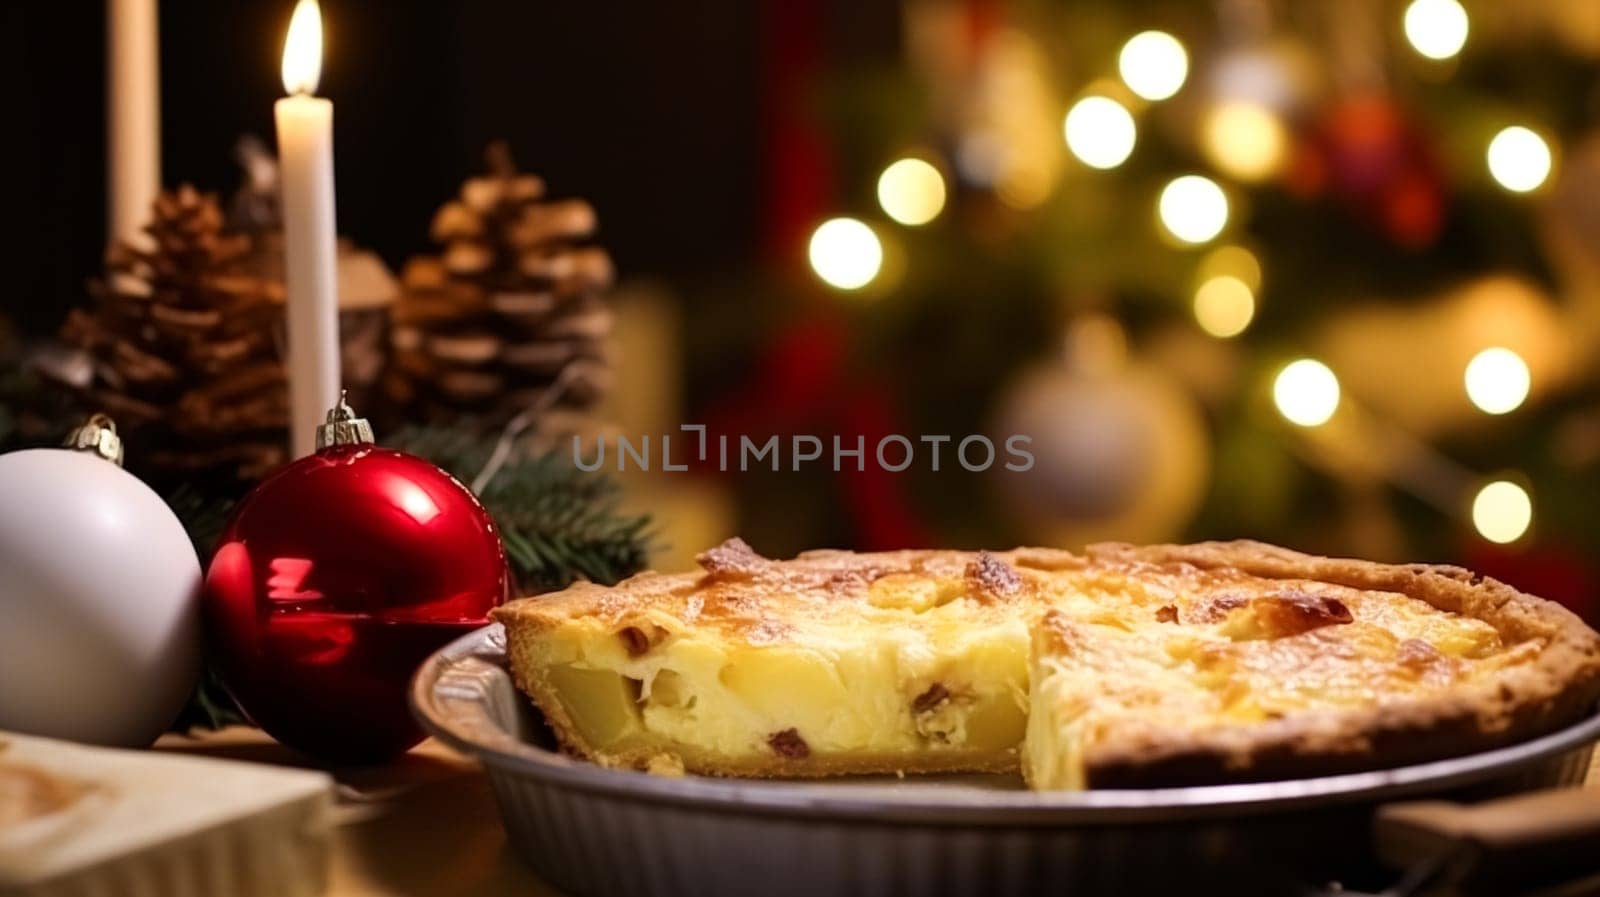 Christmas pie, holiday recipe and home baking, meal for cosy winter English country dinner in the cottage, homemade food and british cuisine by Anneleven